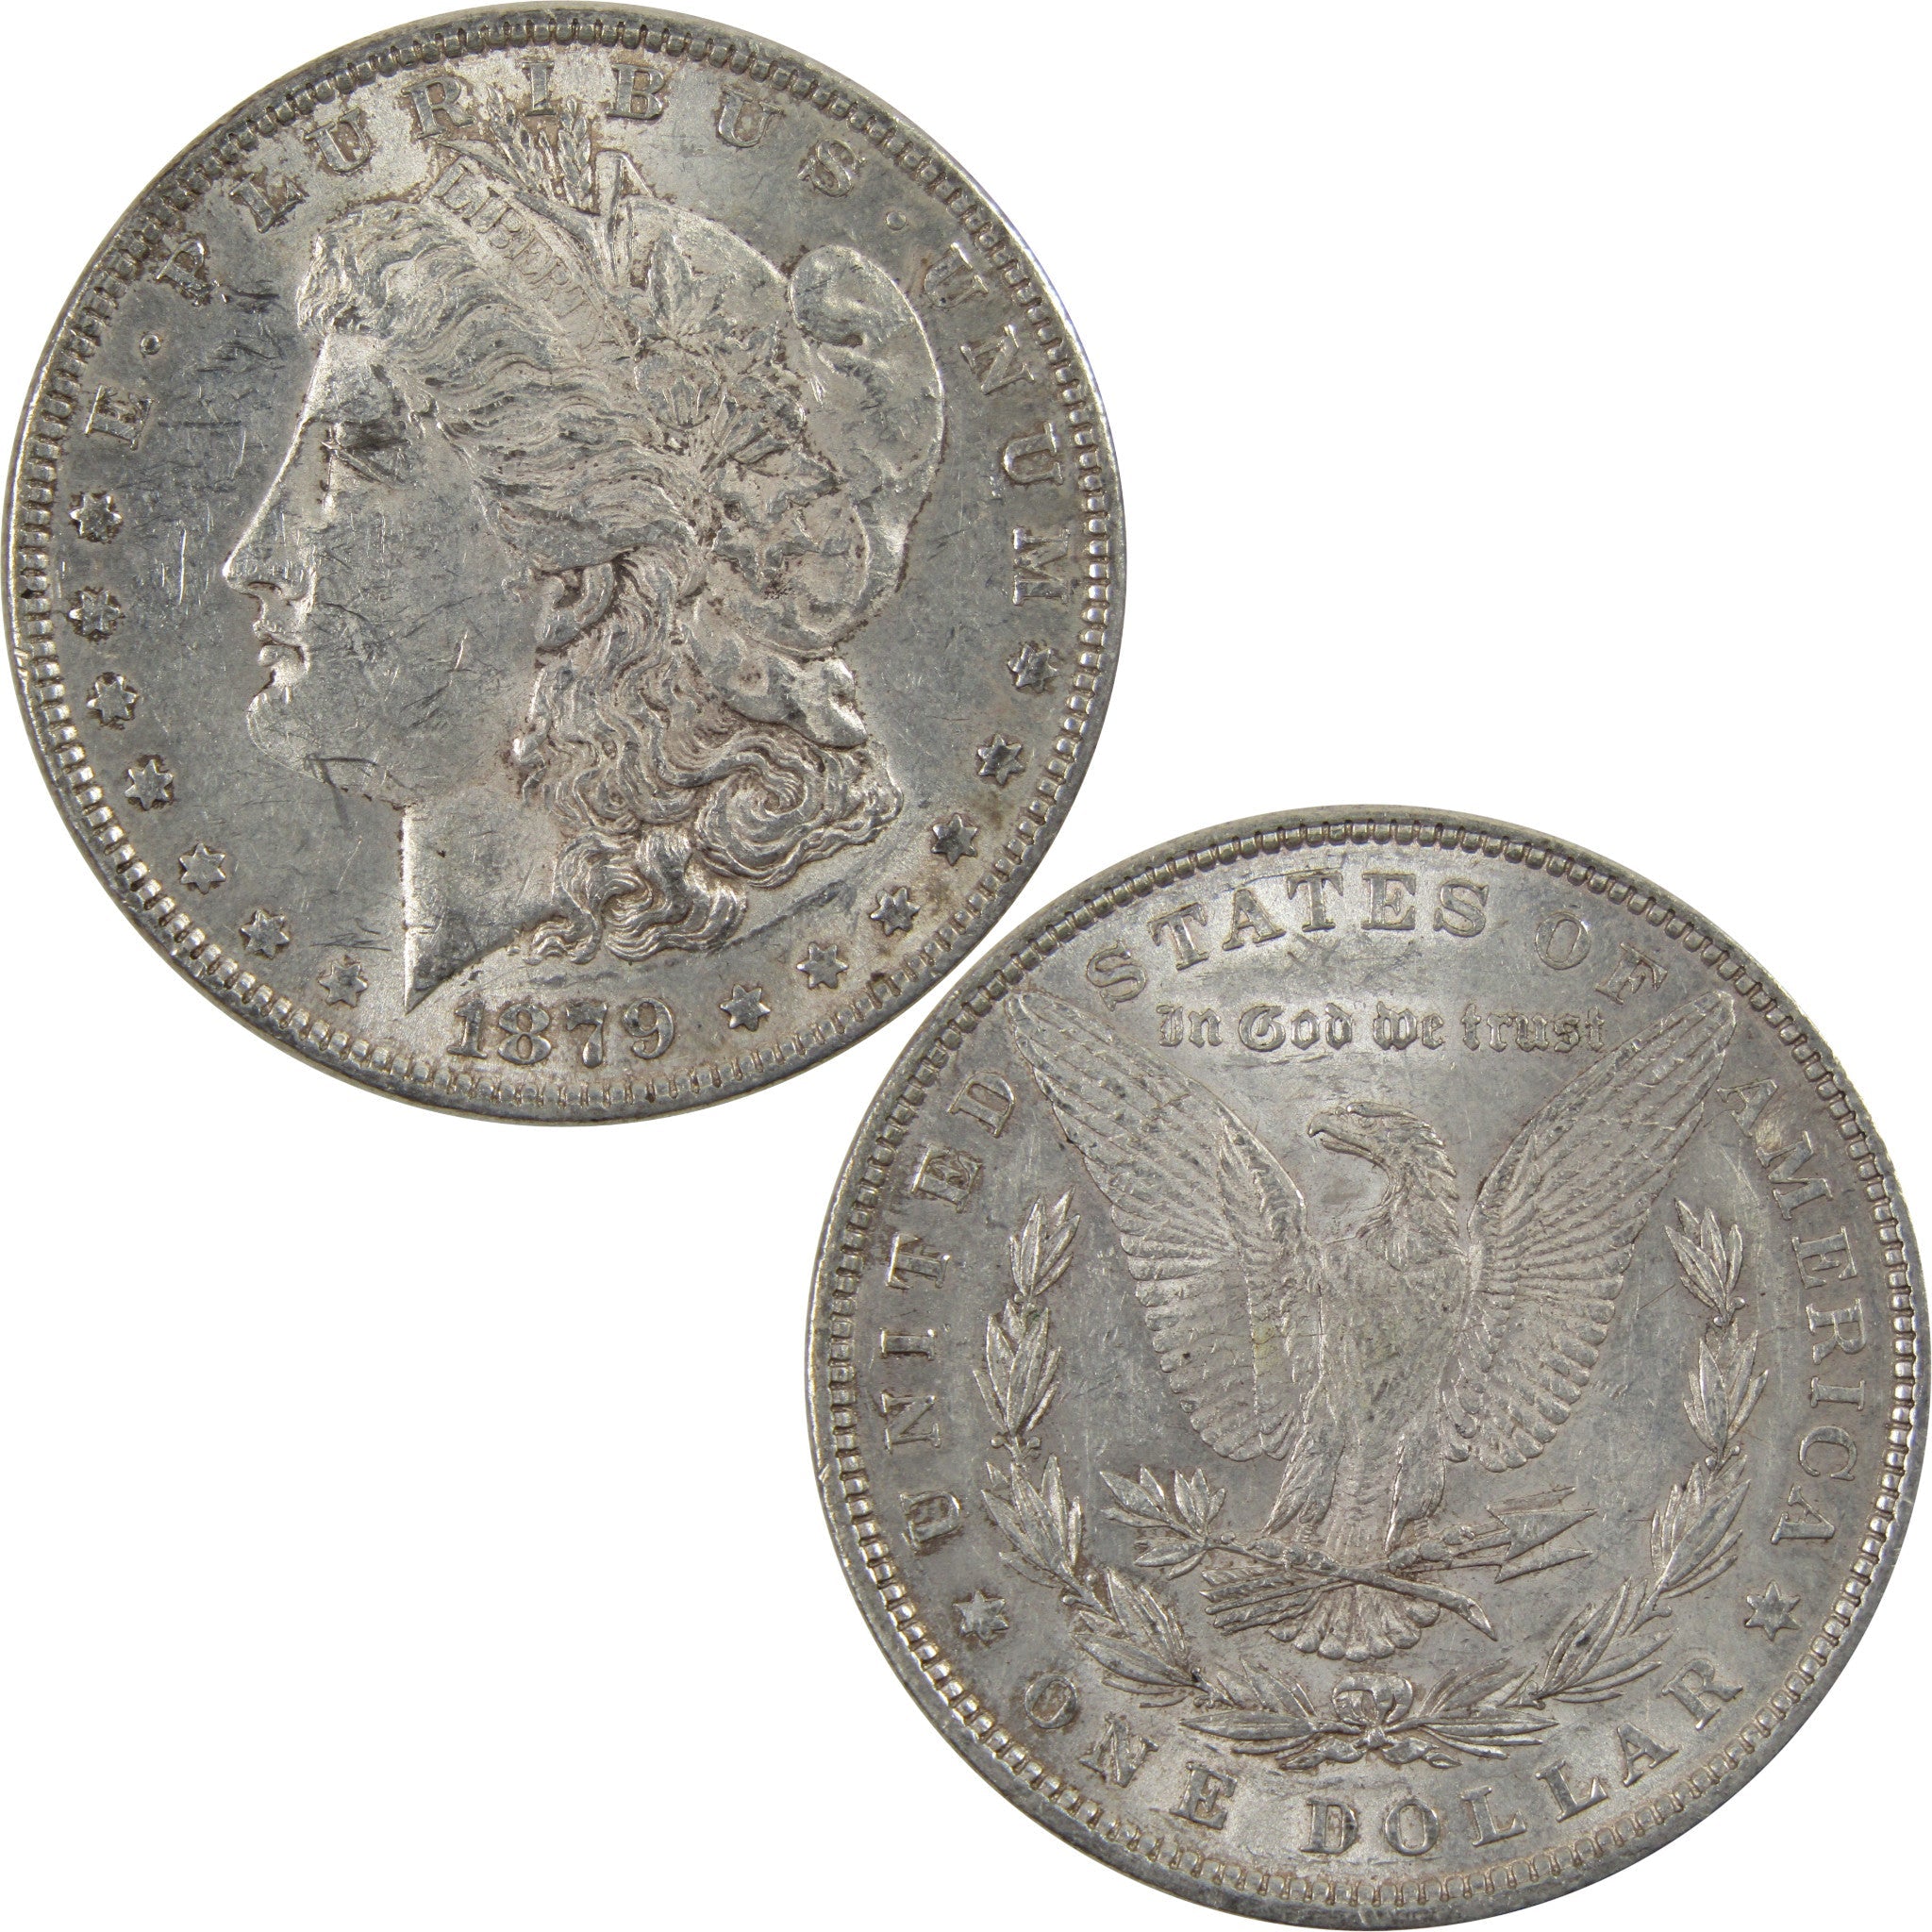 1879 Morgan Dollar AU About Uncirculated 90% Silver $1 Coin SKU:I5454 - Morgan coin - Morgan silver dollar - Morgan silver dollar for sale - Profile Coins &amp; Collectibles